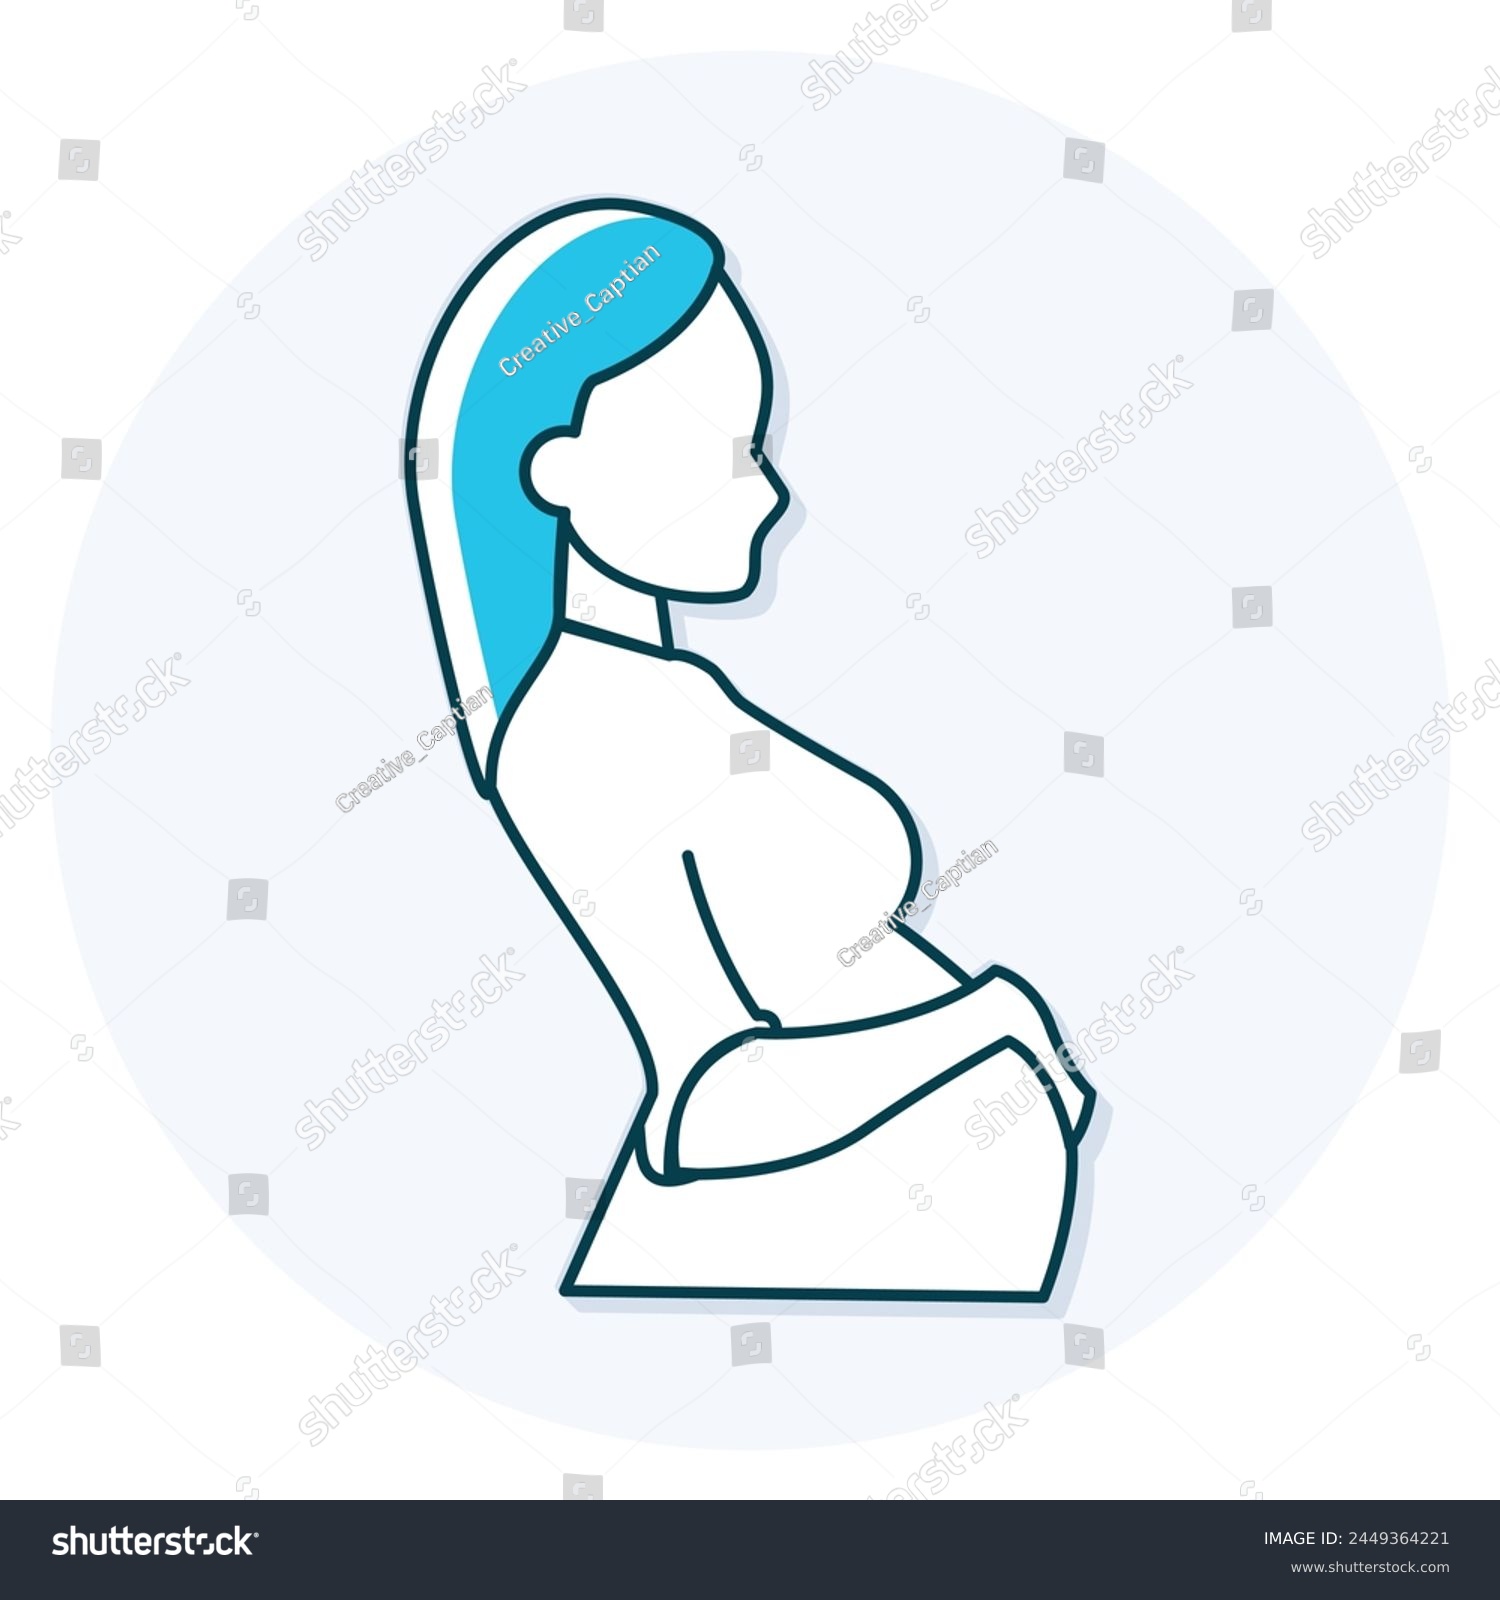 SVG of Implement supportive belly panels for maternity wear innovation, offering pregnant individuals enhanced comfort and support during various activities. svg